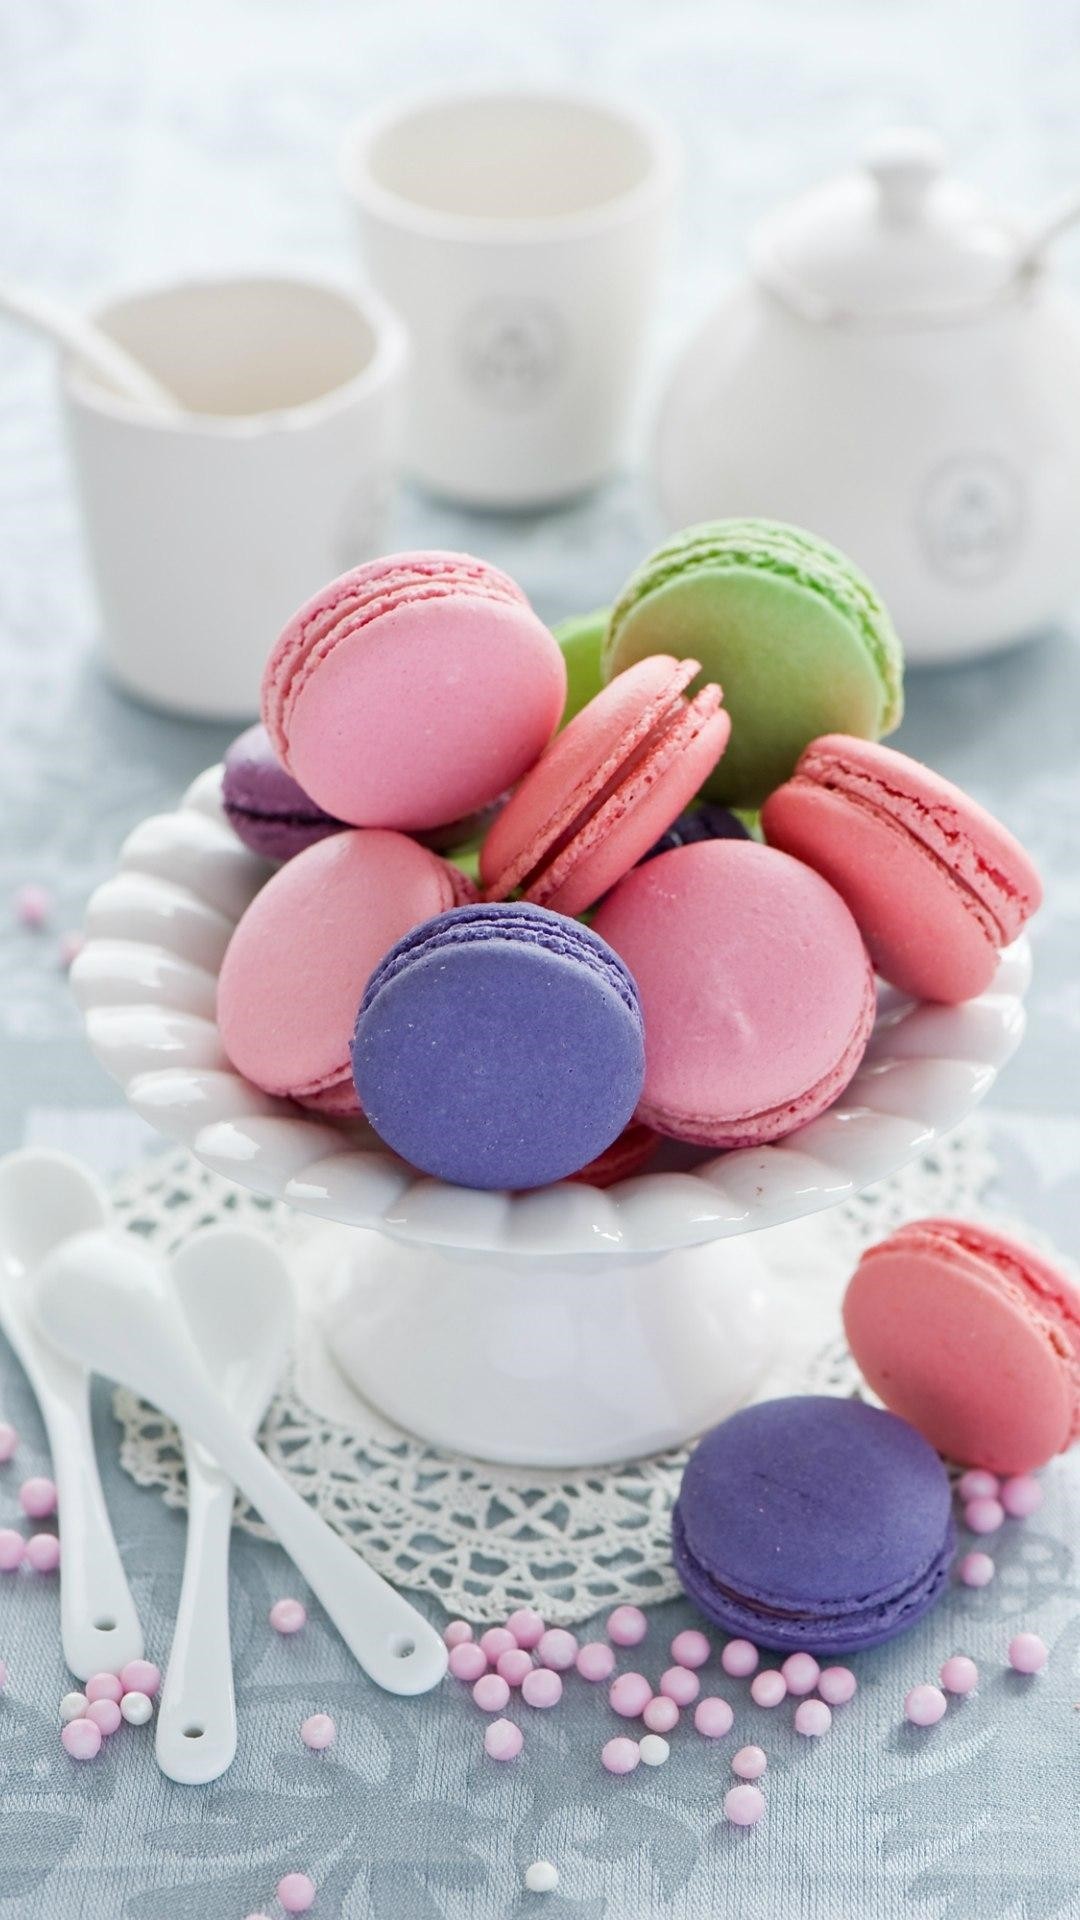 Macaroons wallpaper for android